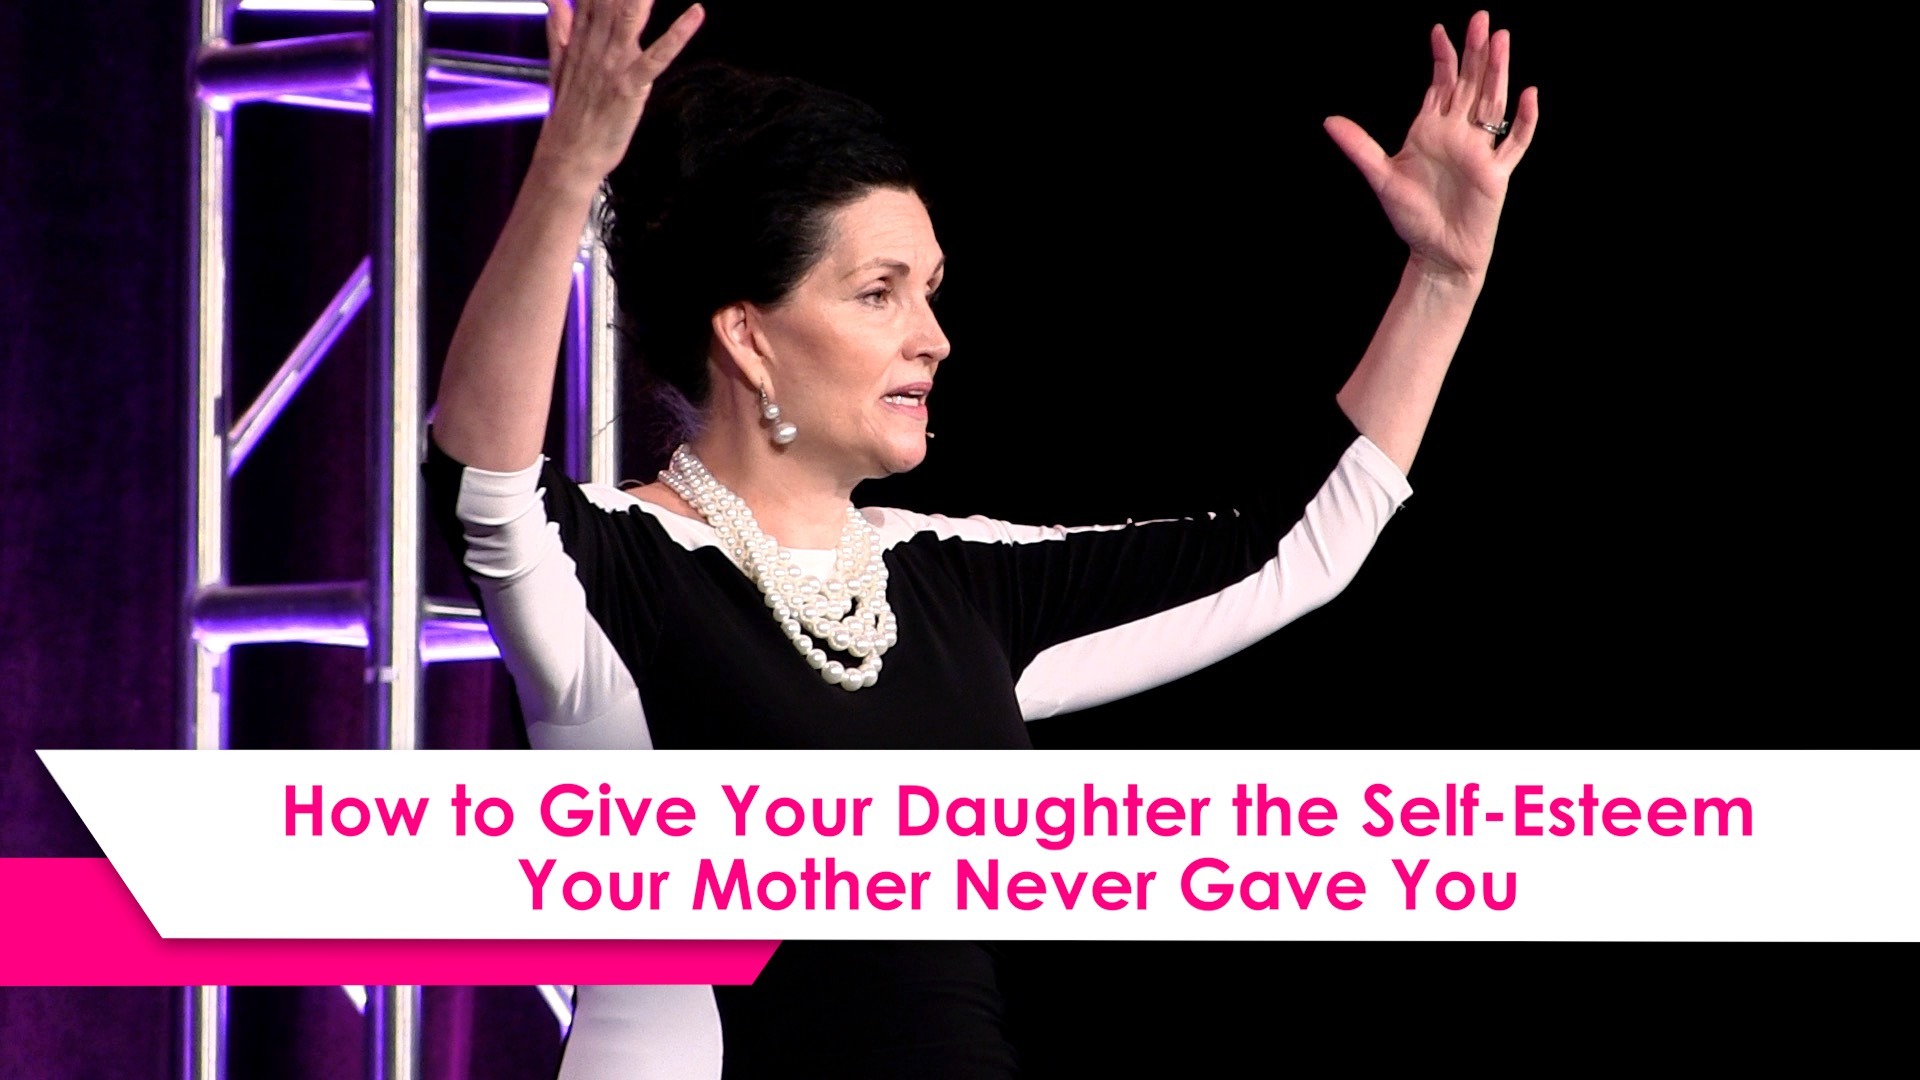 How to Give Your Daughter The Self-Esteem Your Mother Never Gave You